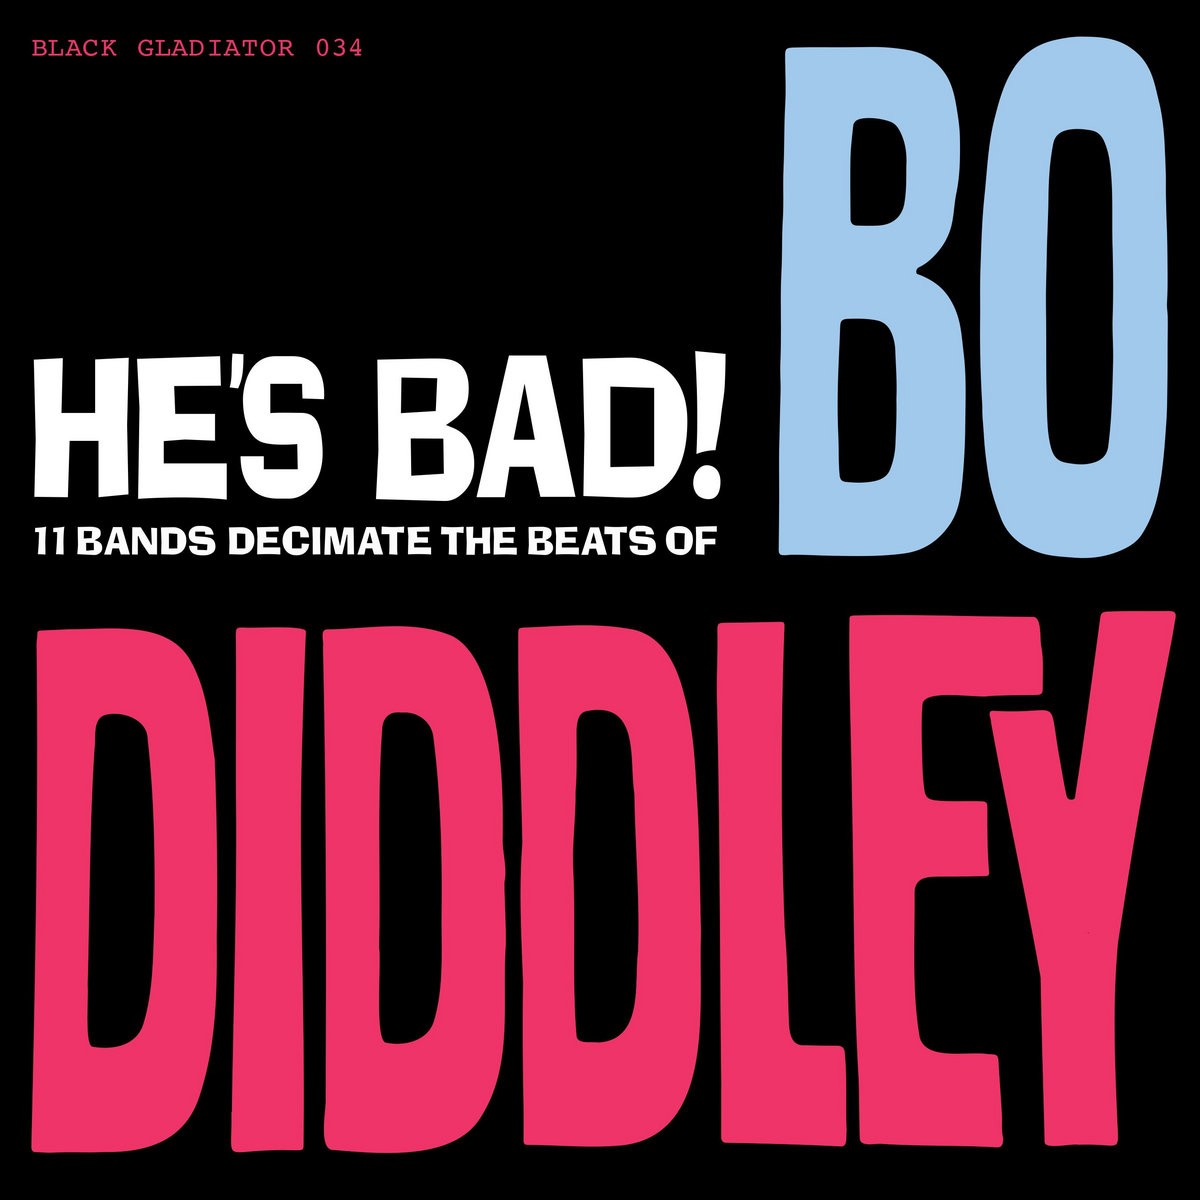 Various Artists - He’s Bad! 11 Bands Decimate The Beats Of Bo Diddley